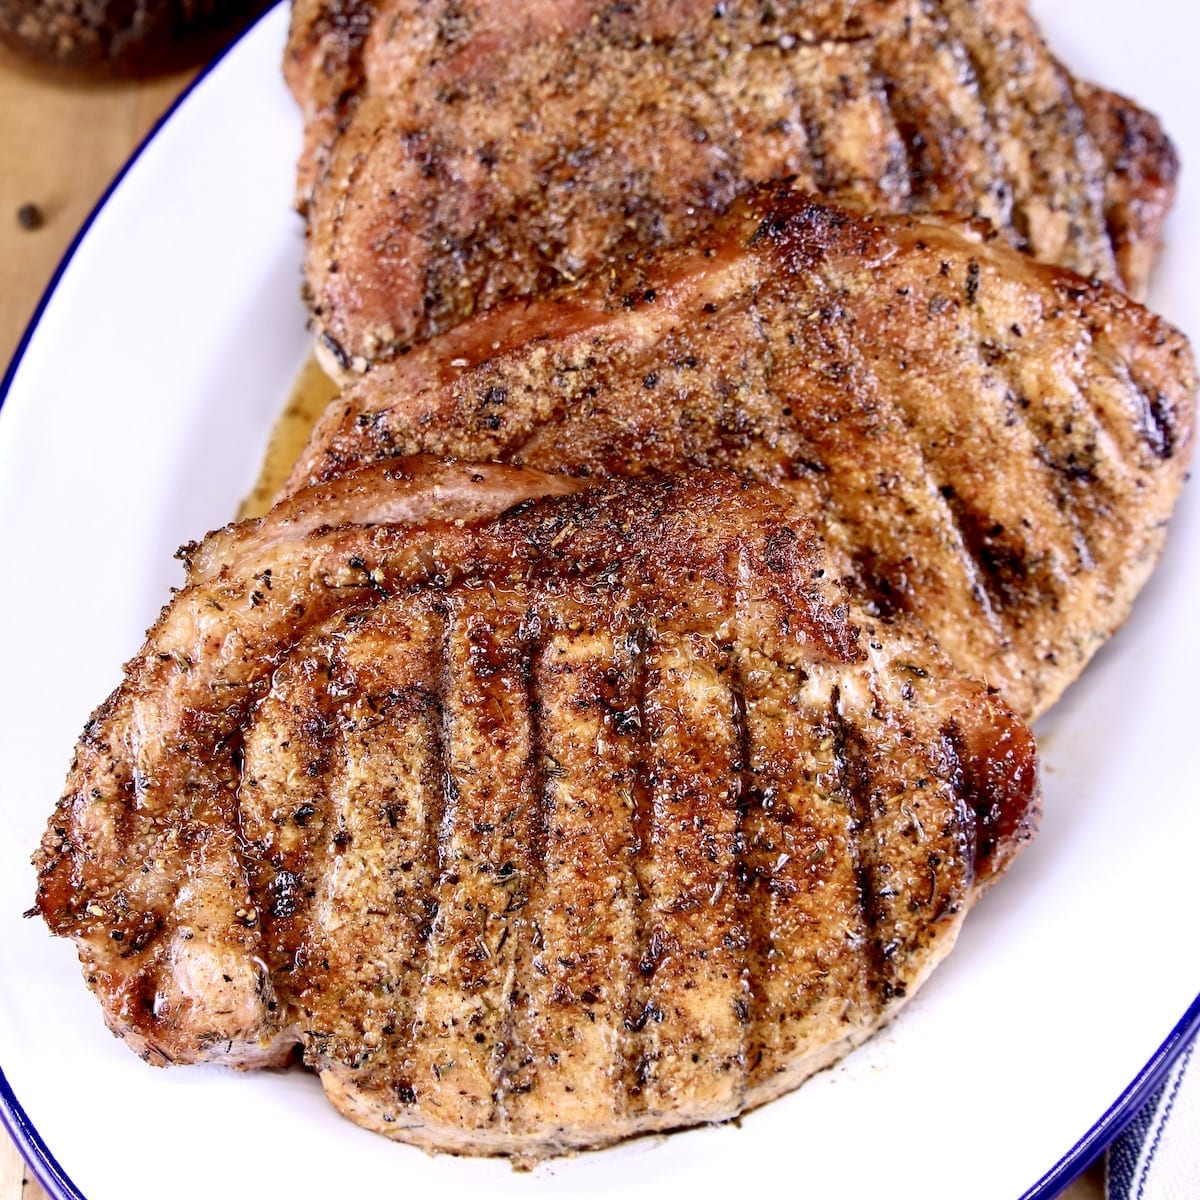 Garlic and Onion Grilled Pork Chops on a platter